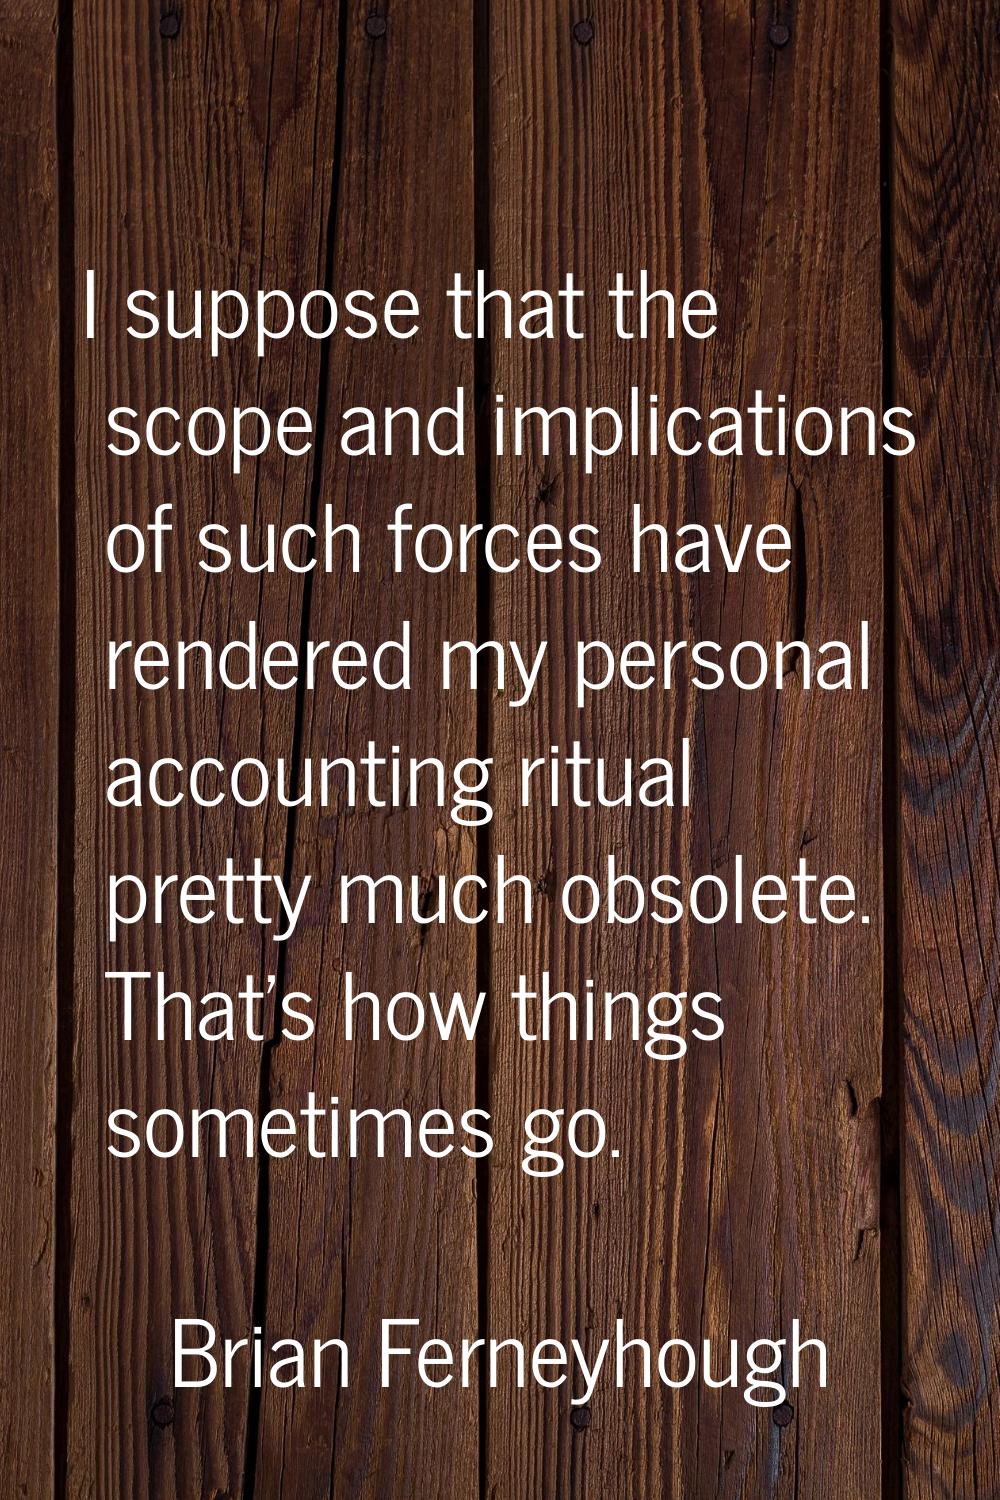 I suppose that the scope and implications of such forces have rendered my personal accounting ritua